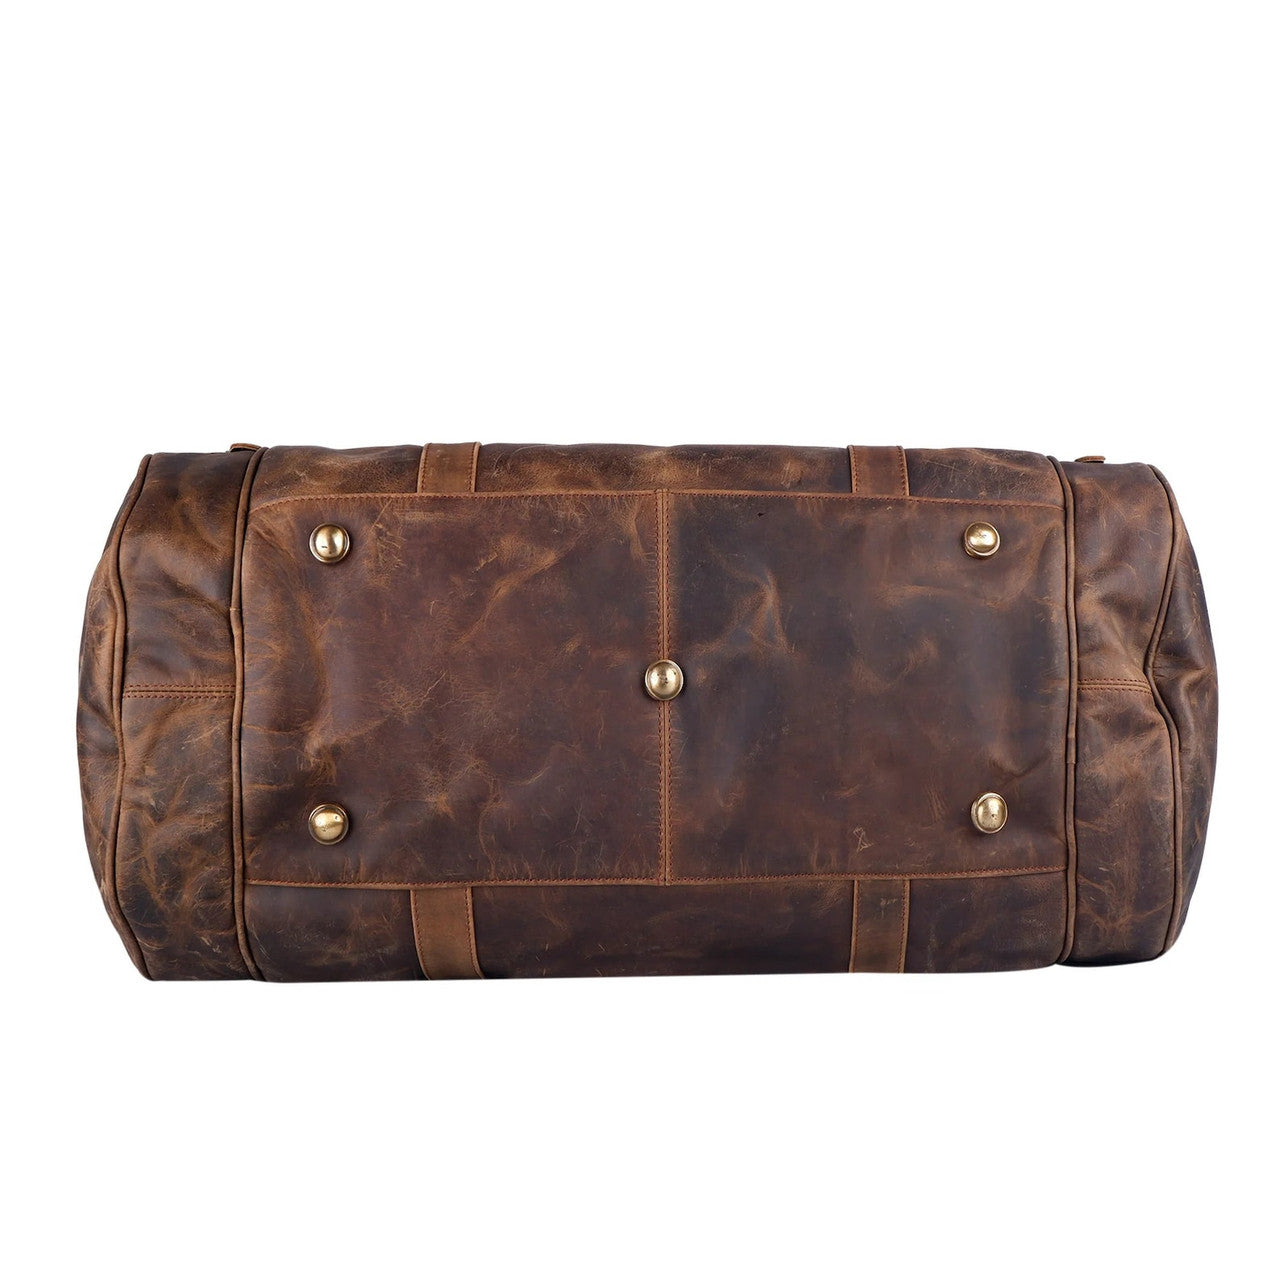 Textured Brown Leather Duffle Bag